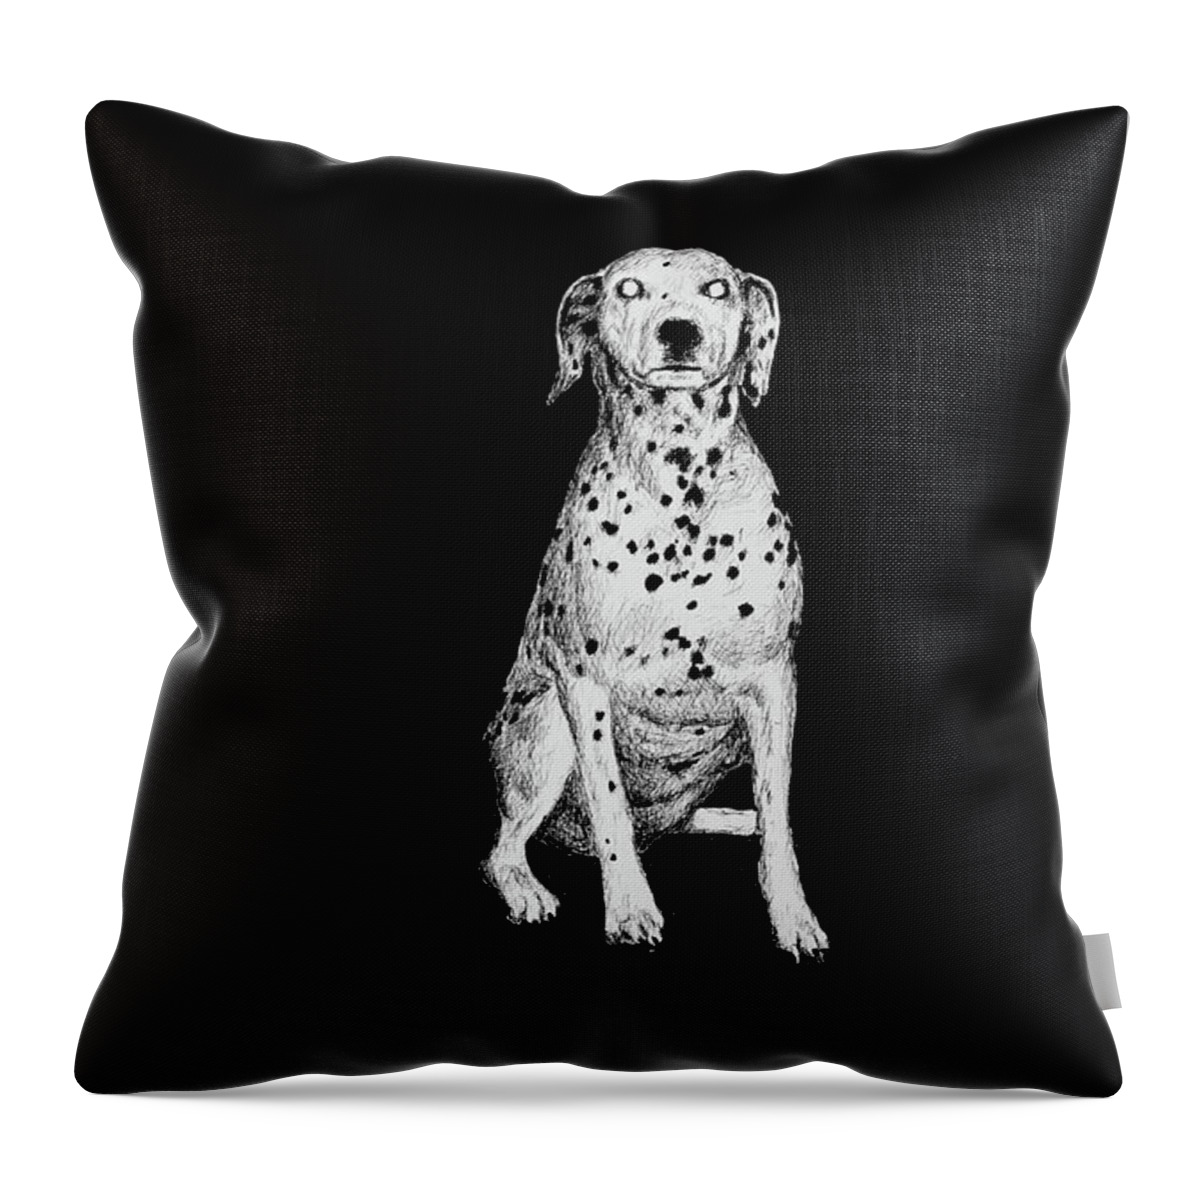 Dalmatian Dog Throw Pillow featuring the drawing The Dog and the Chip of the Beast by Hans Egil Saele